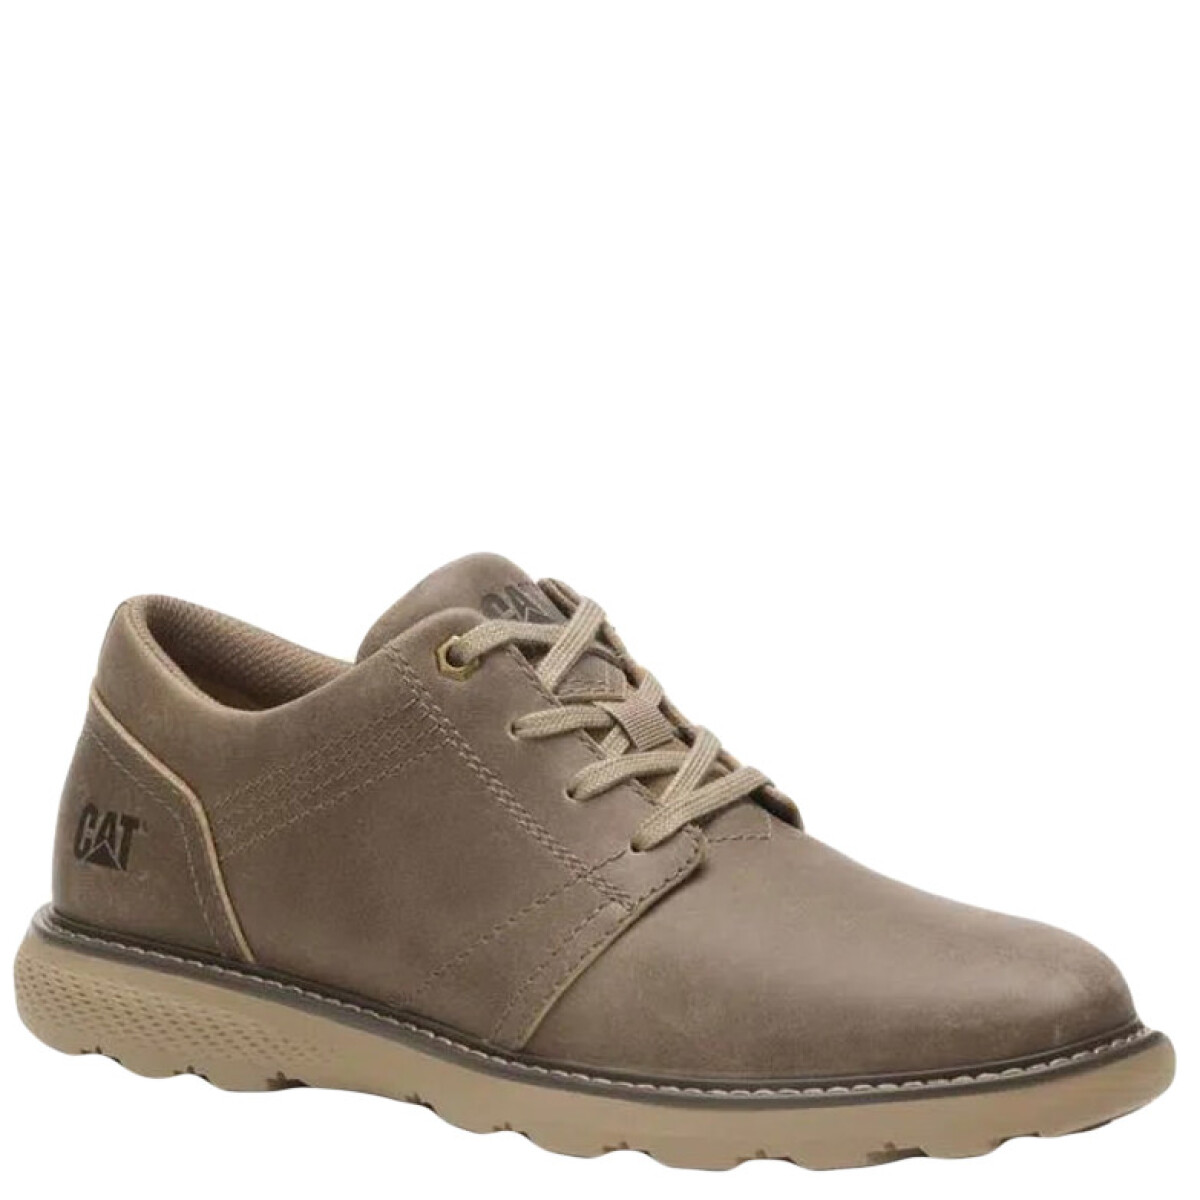 Zapato Casual Oly 20 Caterpillar - Beaned 